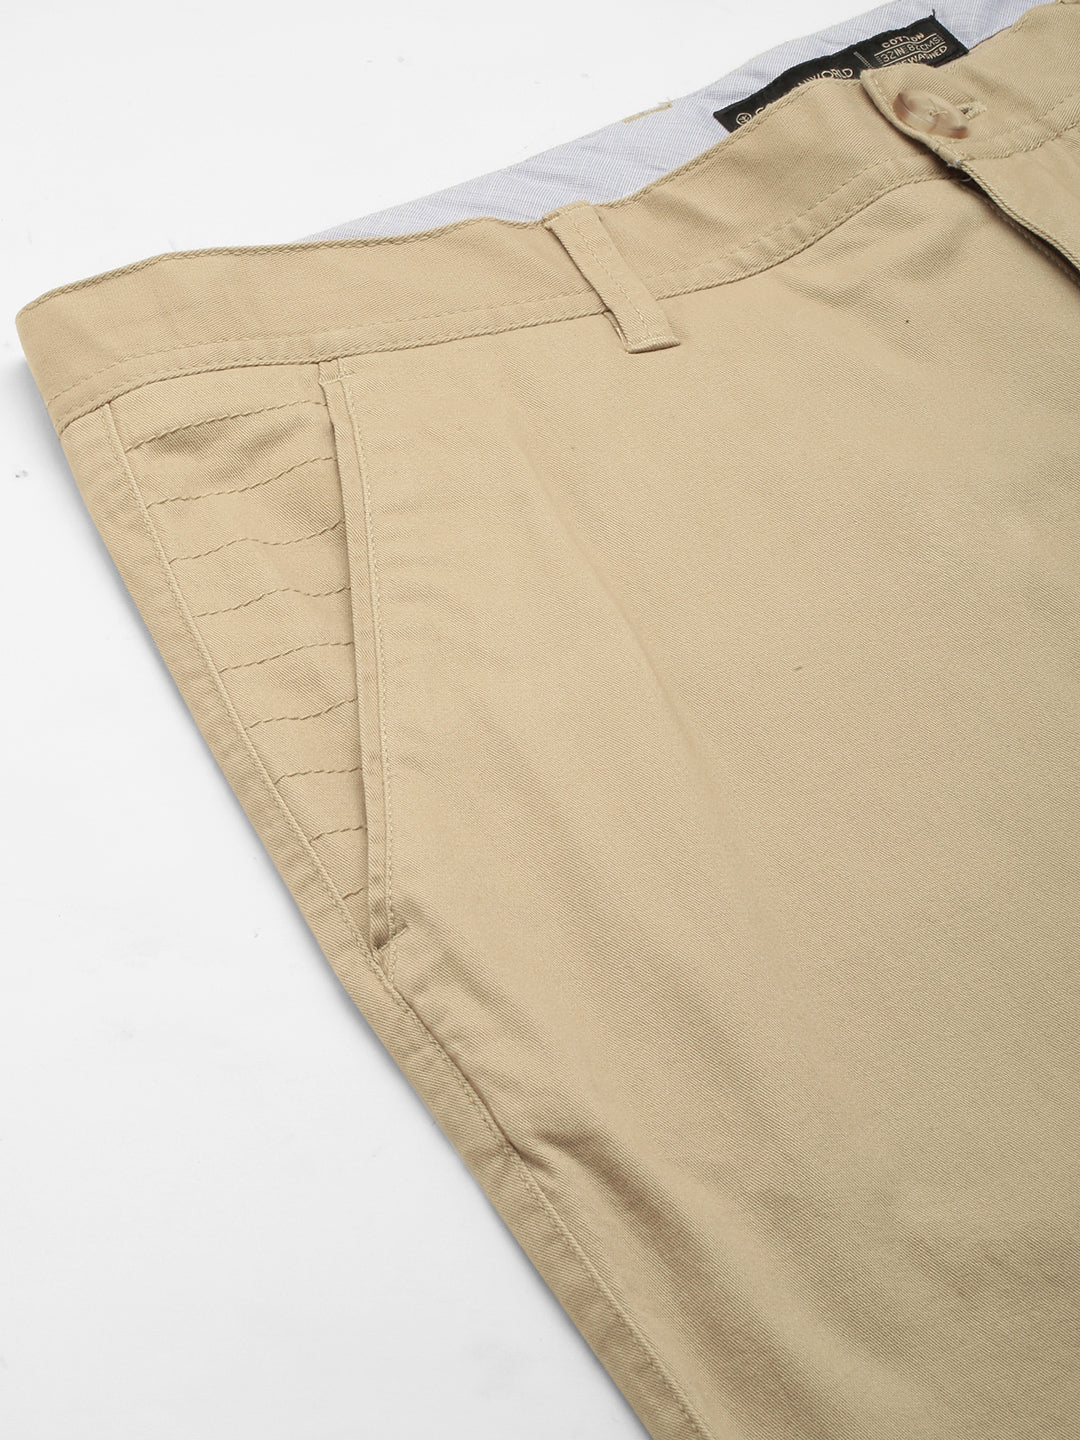 Basic Rights: Product Focus: High Waist Linen Trousers | Milled